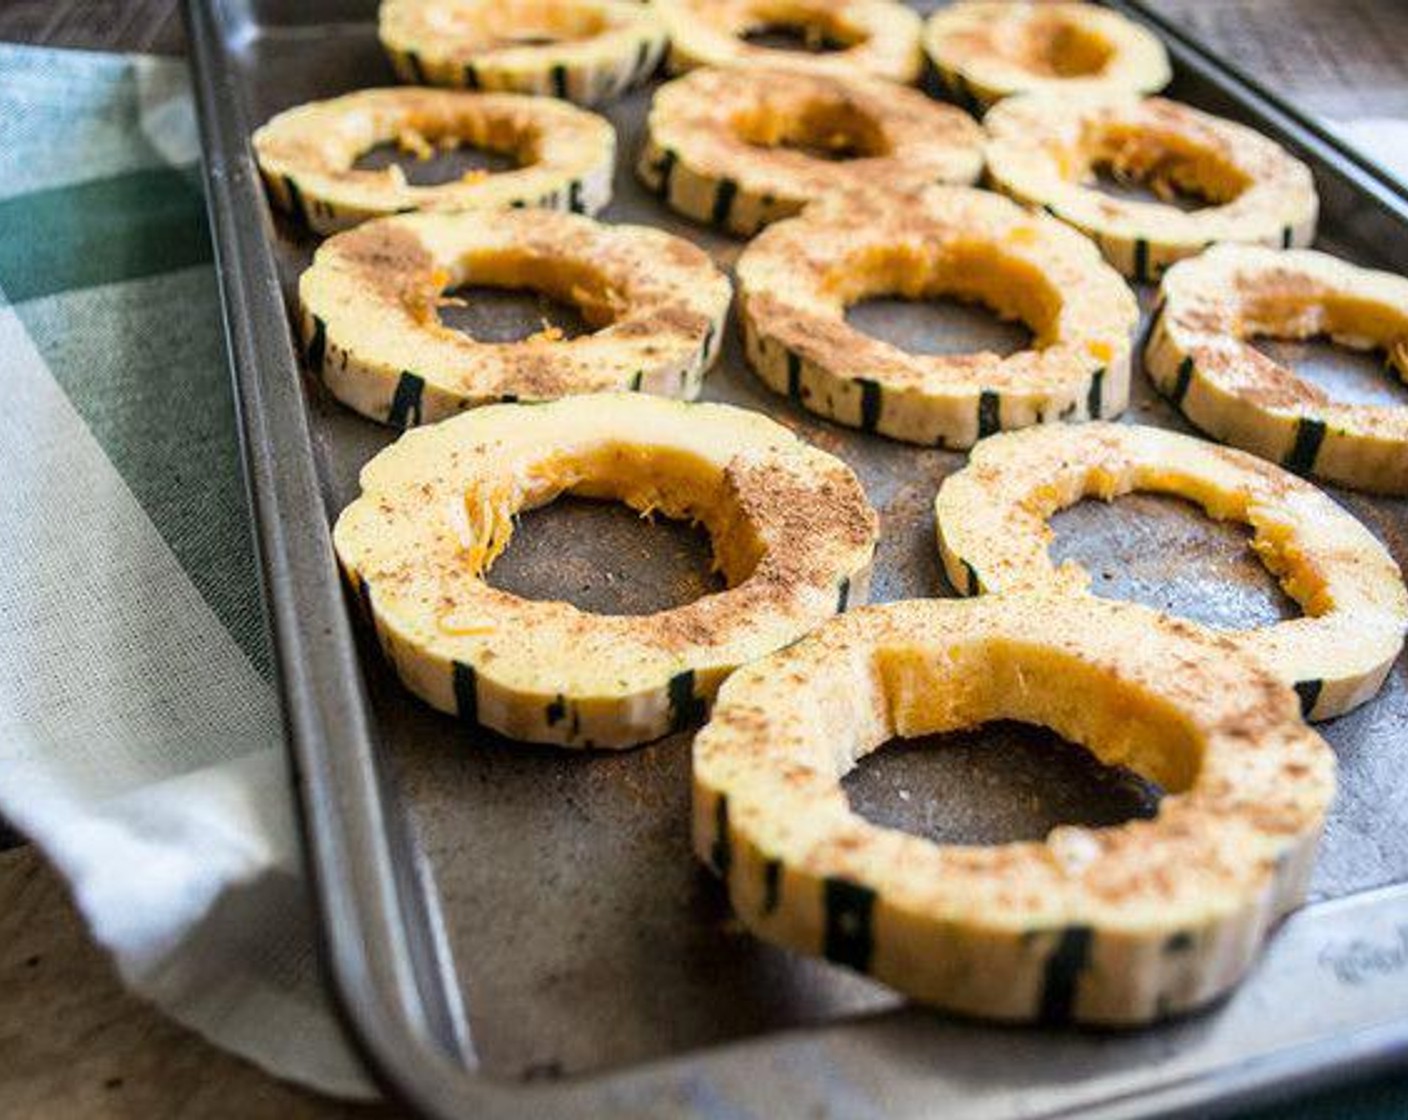 step 2 Spray baking sheet with Coconut Oil Cooking Spray (as needed) then slice Delicata Squash (1) in approx 1/2 inch slices, remove all seeds and sprinkle with Ground Cinnamon (1/2 tsp) and Pumpkin Pie Spice (1/4 tsp).